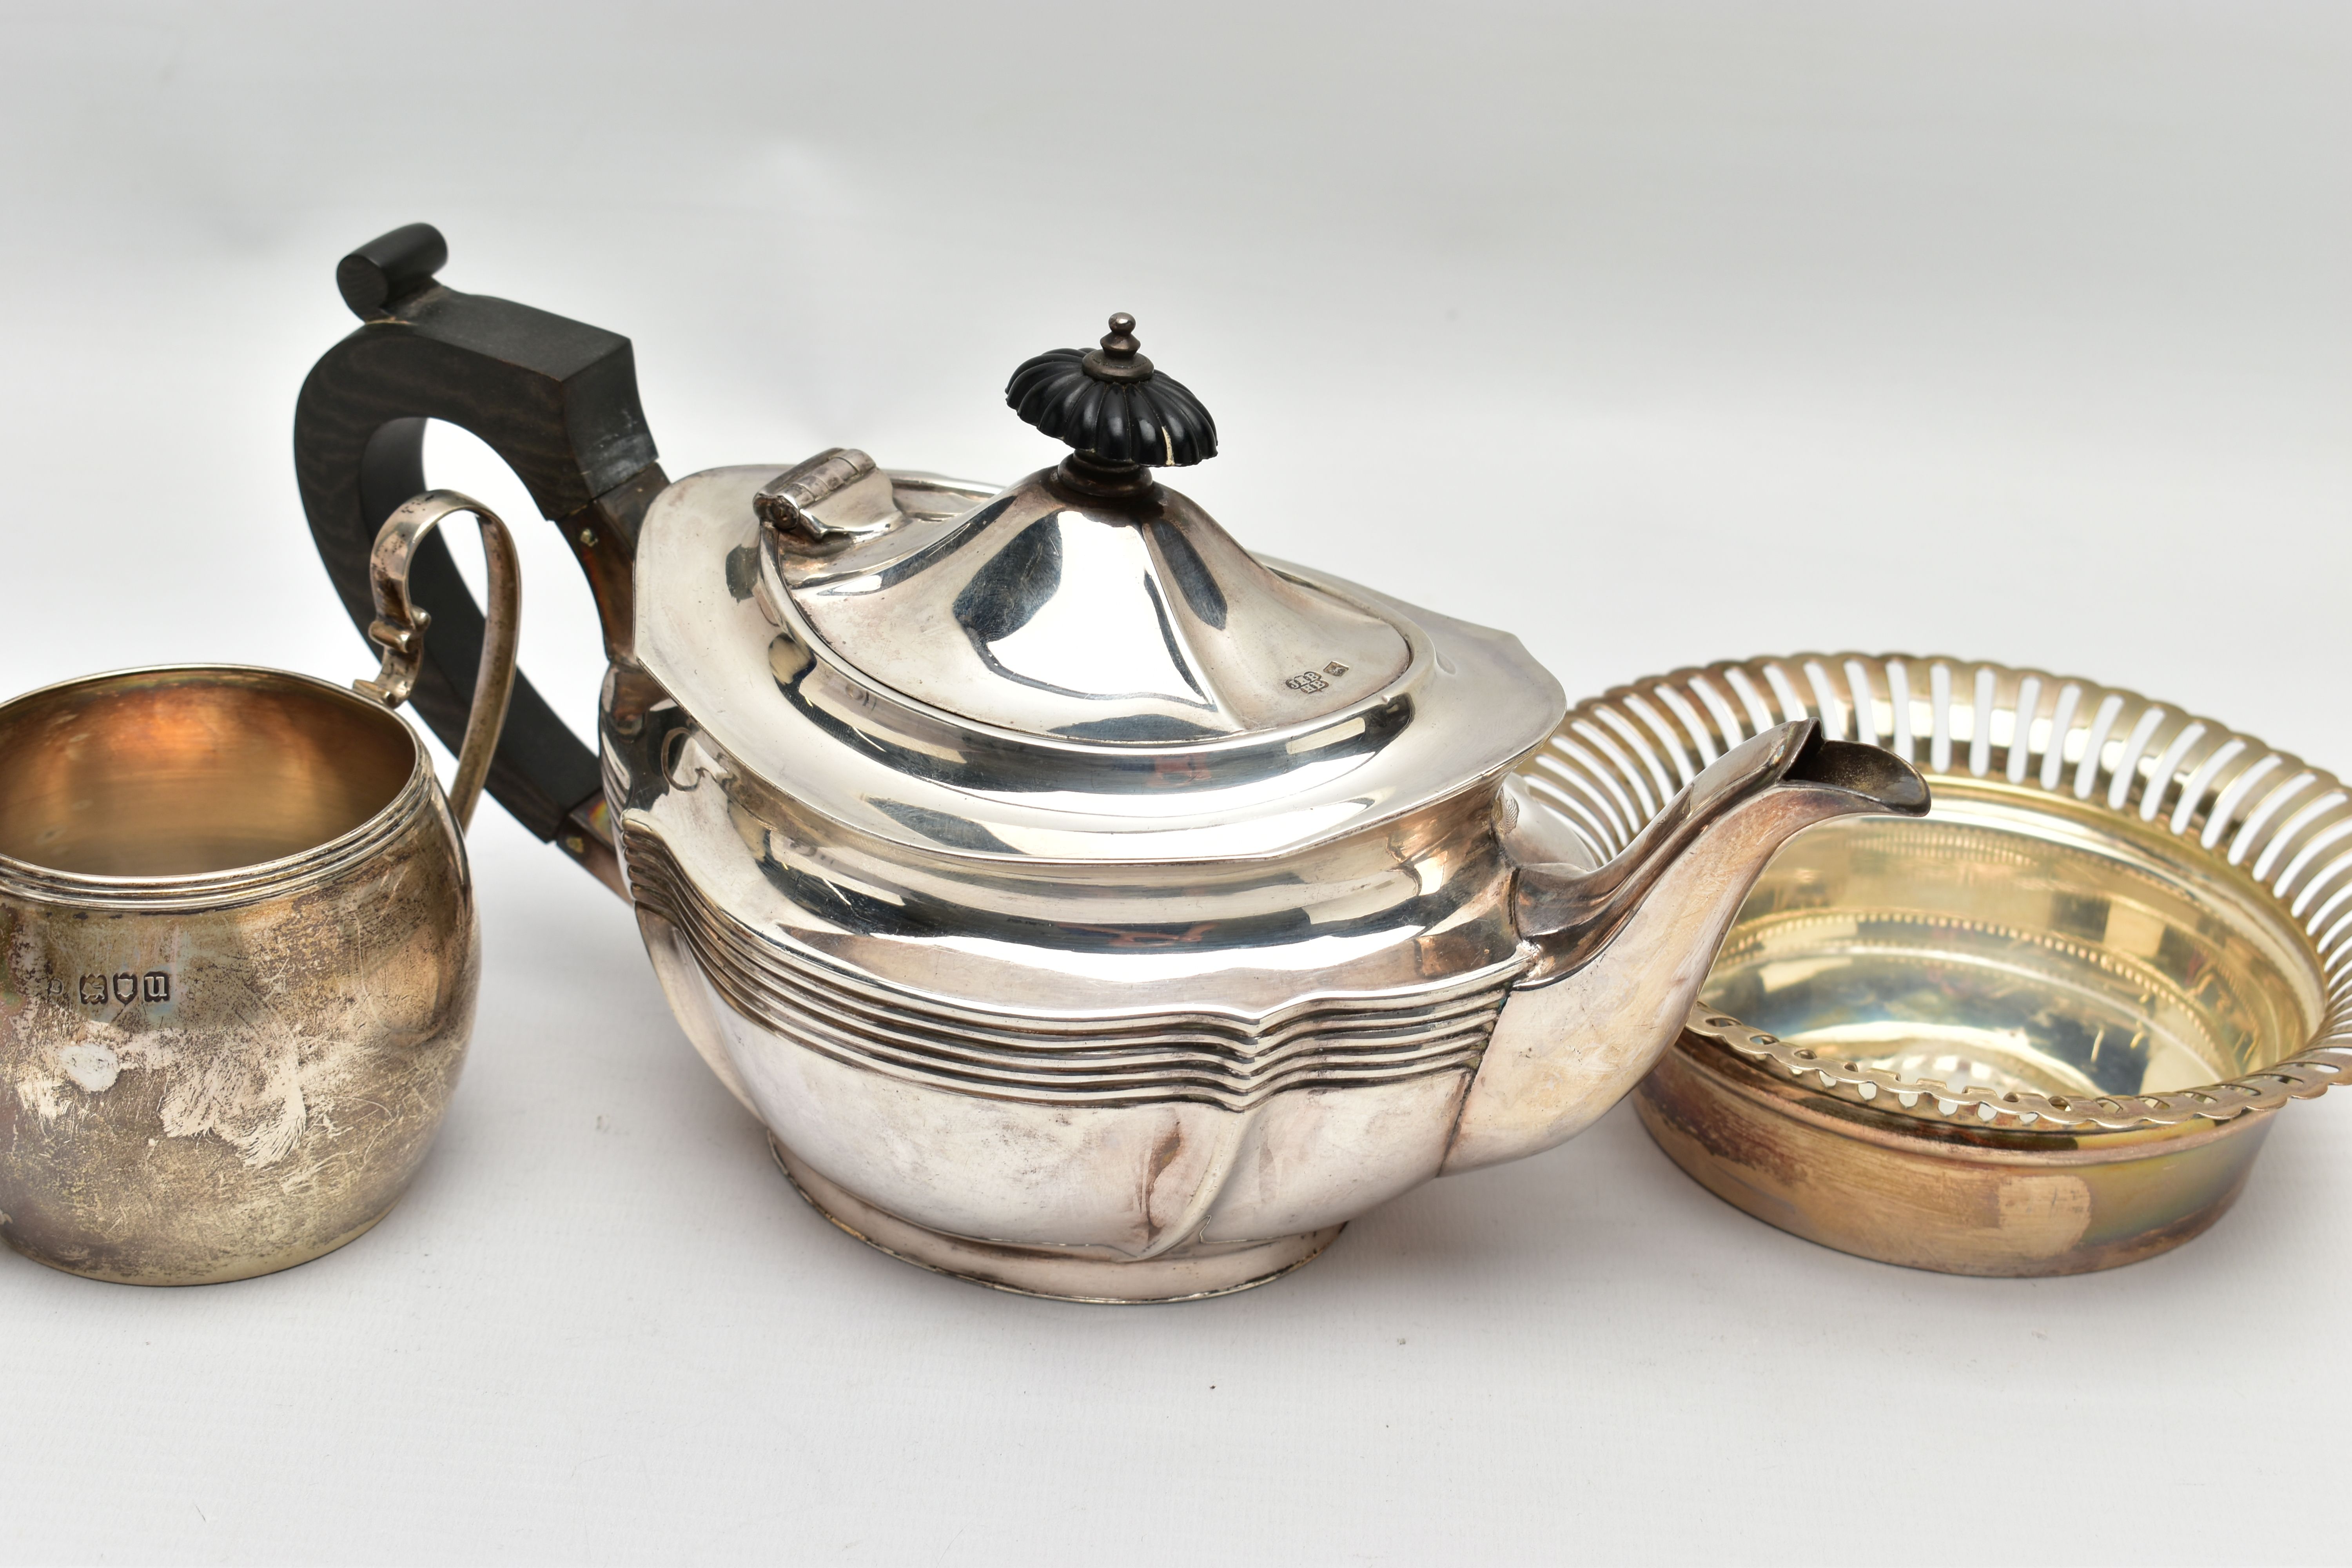 AN EDWARDIAN SILVER BACHELOR'S TEA POT OF SHAPED OVAL FORM, A TWIN HANDLED SILVER SUGAR BOWL AND A - Image 8 of 9